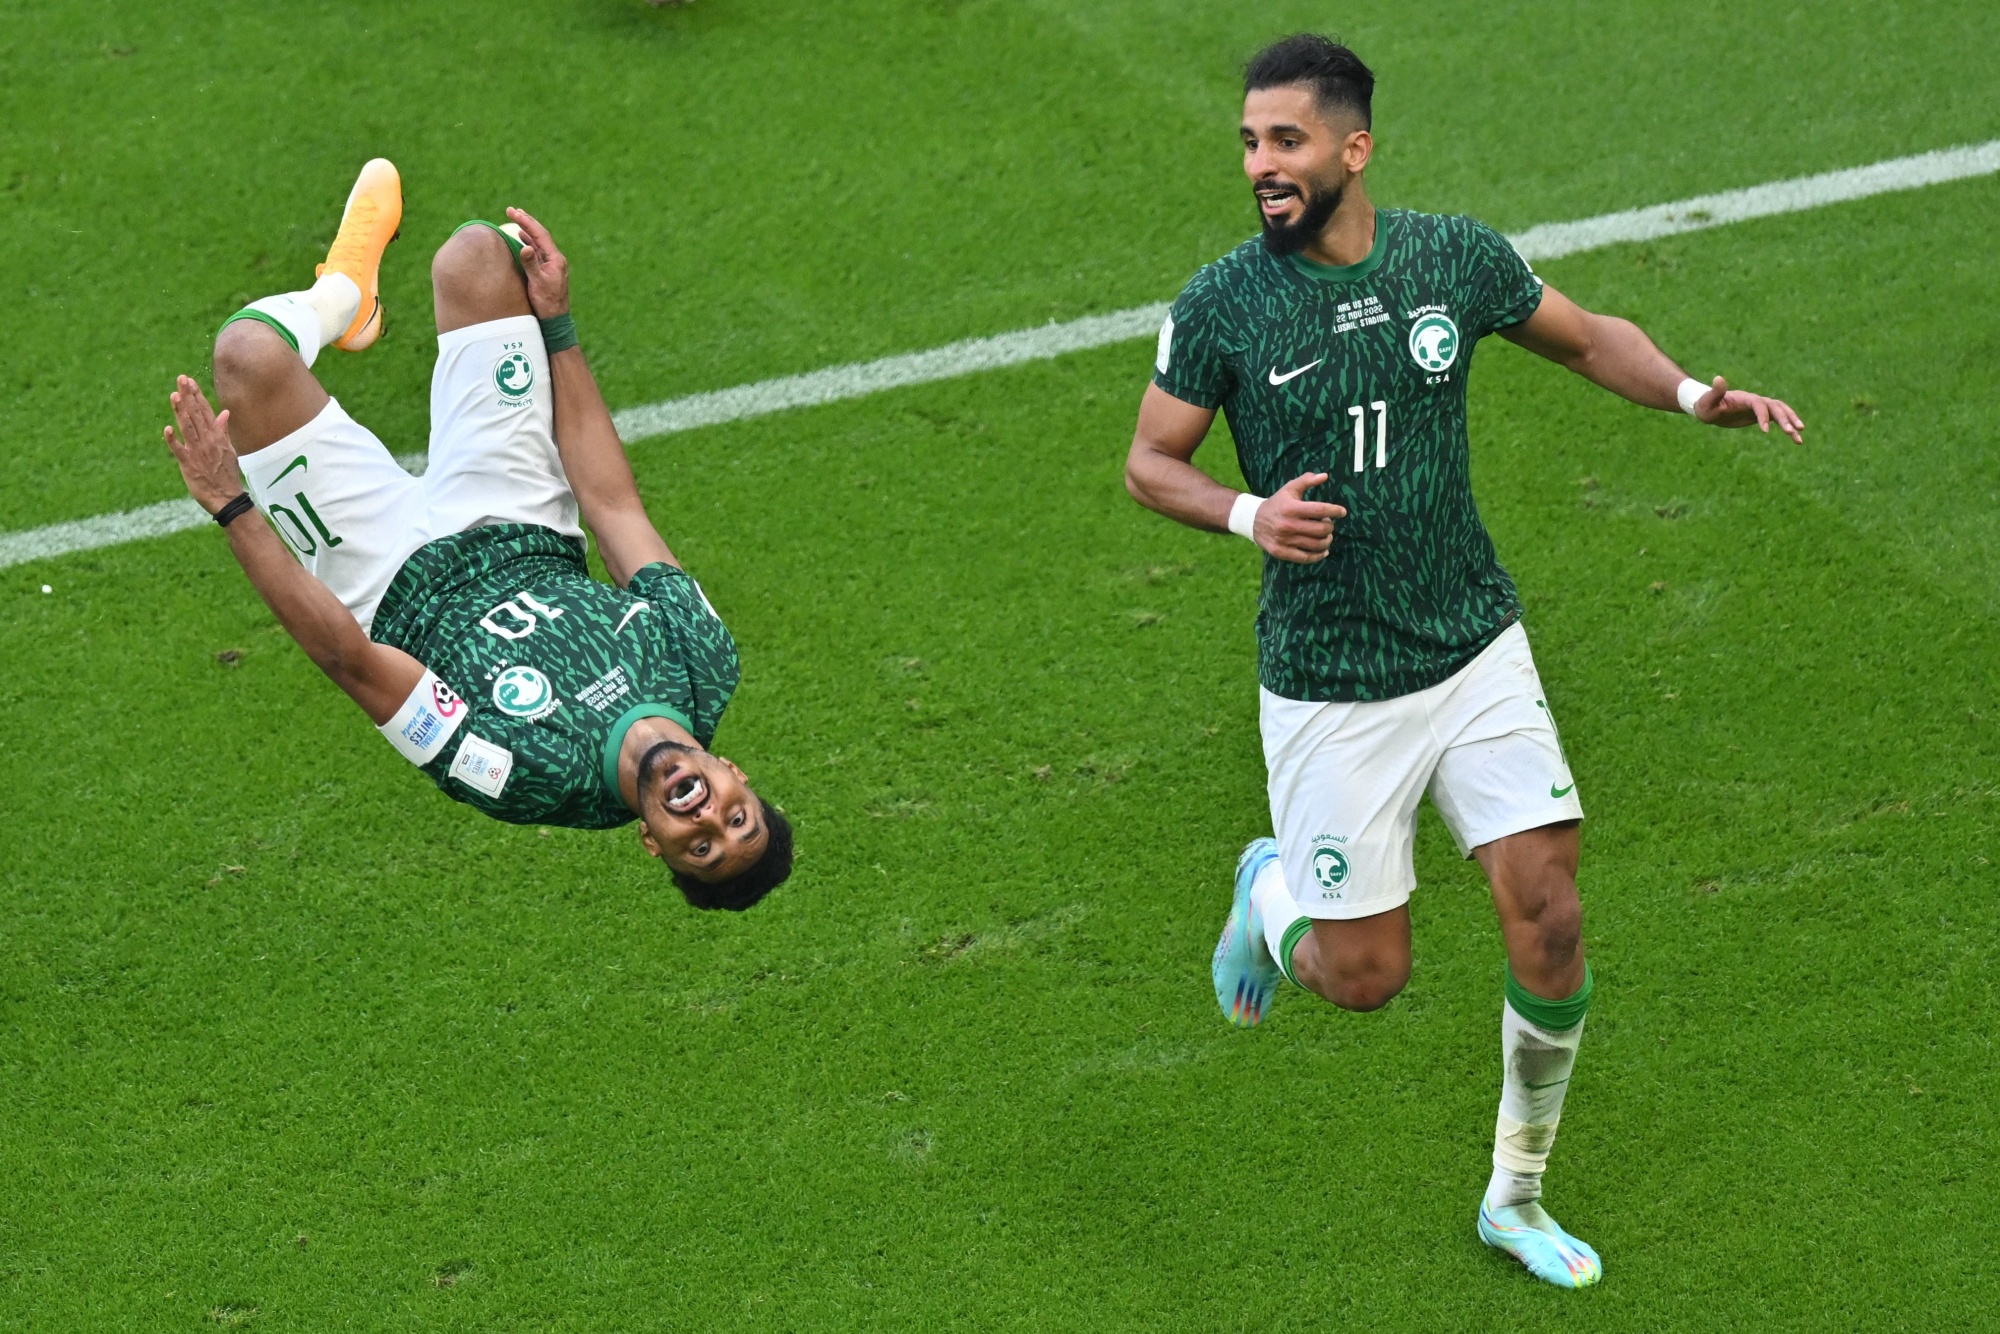 Saudi Arabia Beats Argentina 2-1 in One of Greatest World Cup Upsets